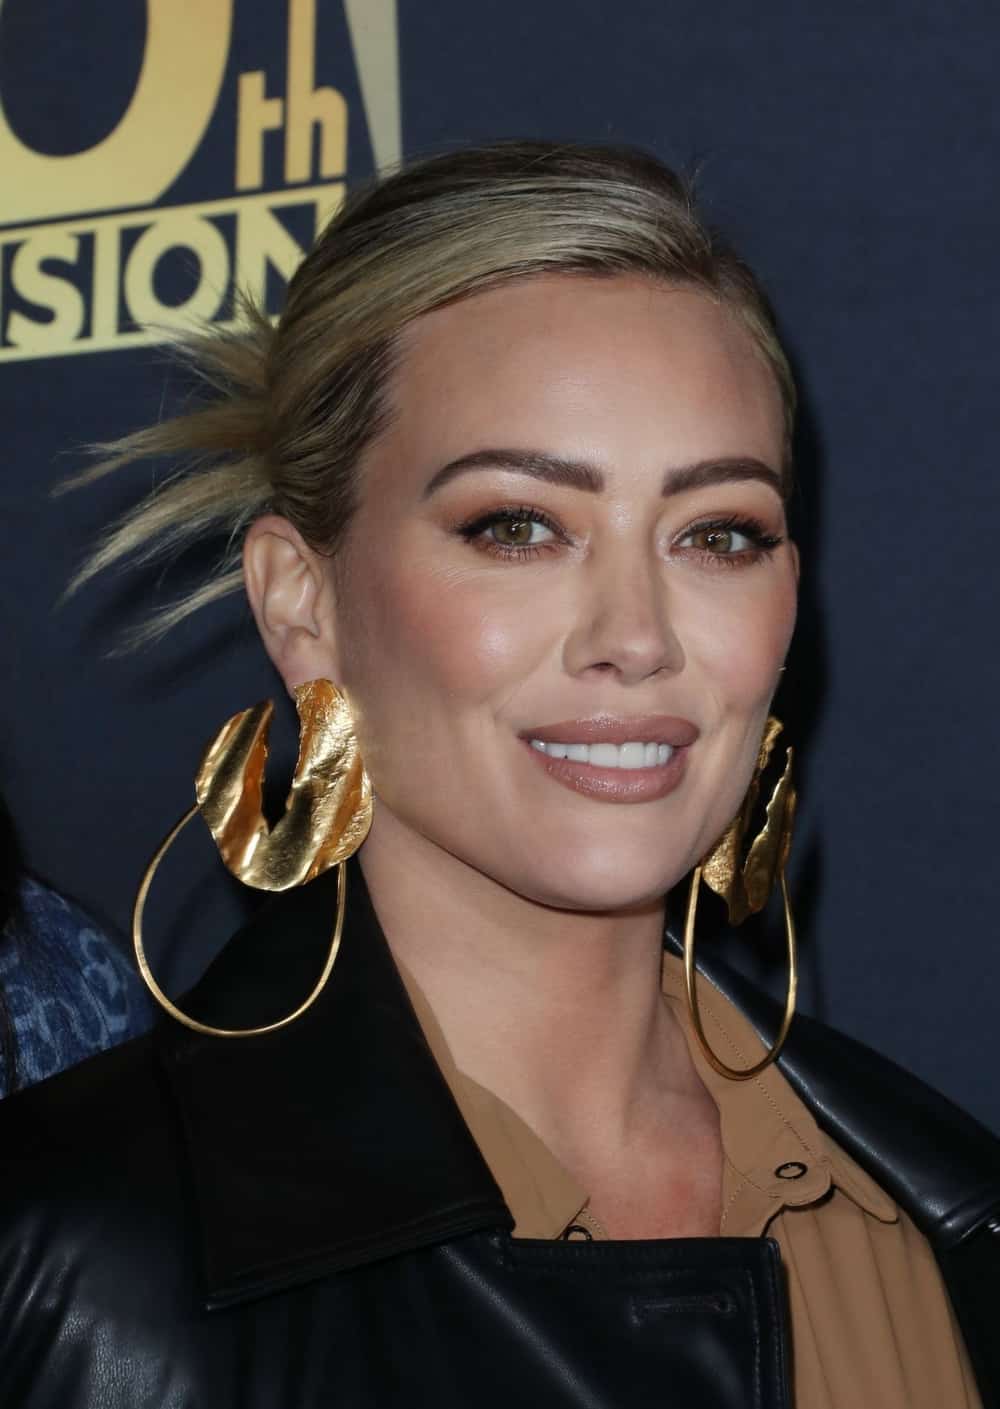 Hilary Duff Looked Mesmerizing at the "How I Met Your Father" Fans Event